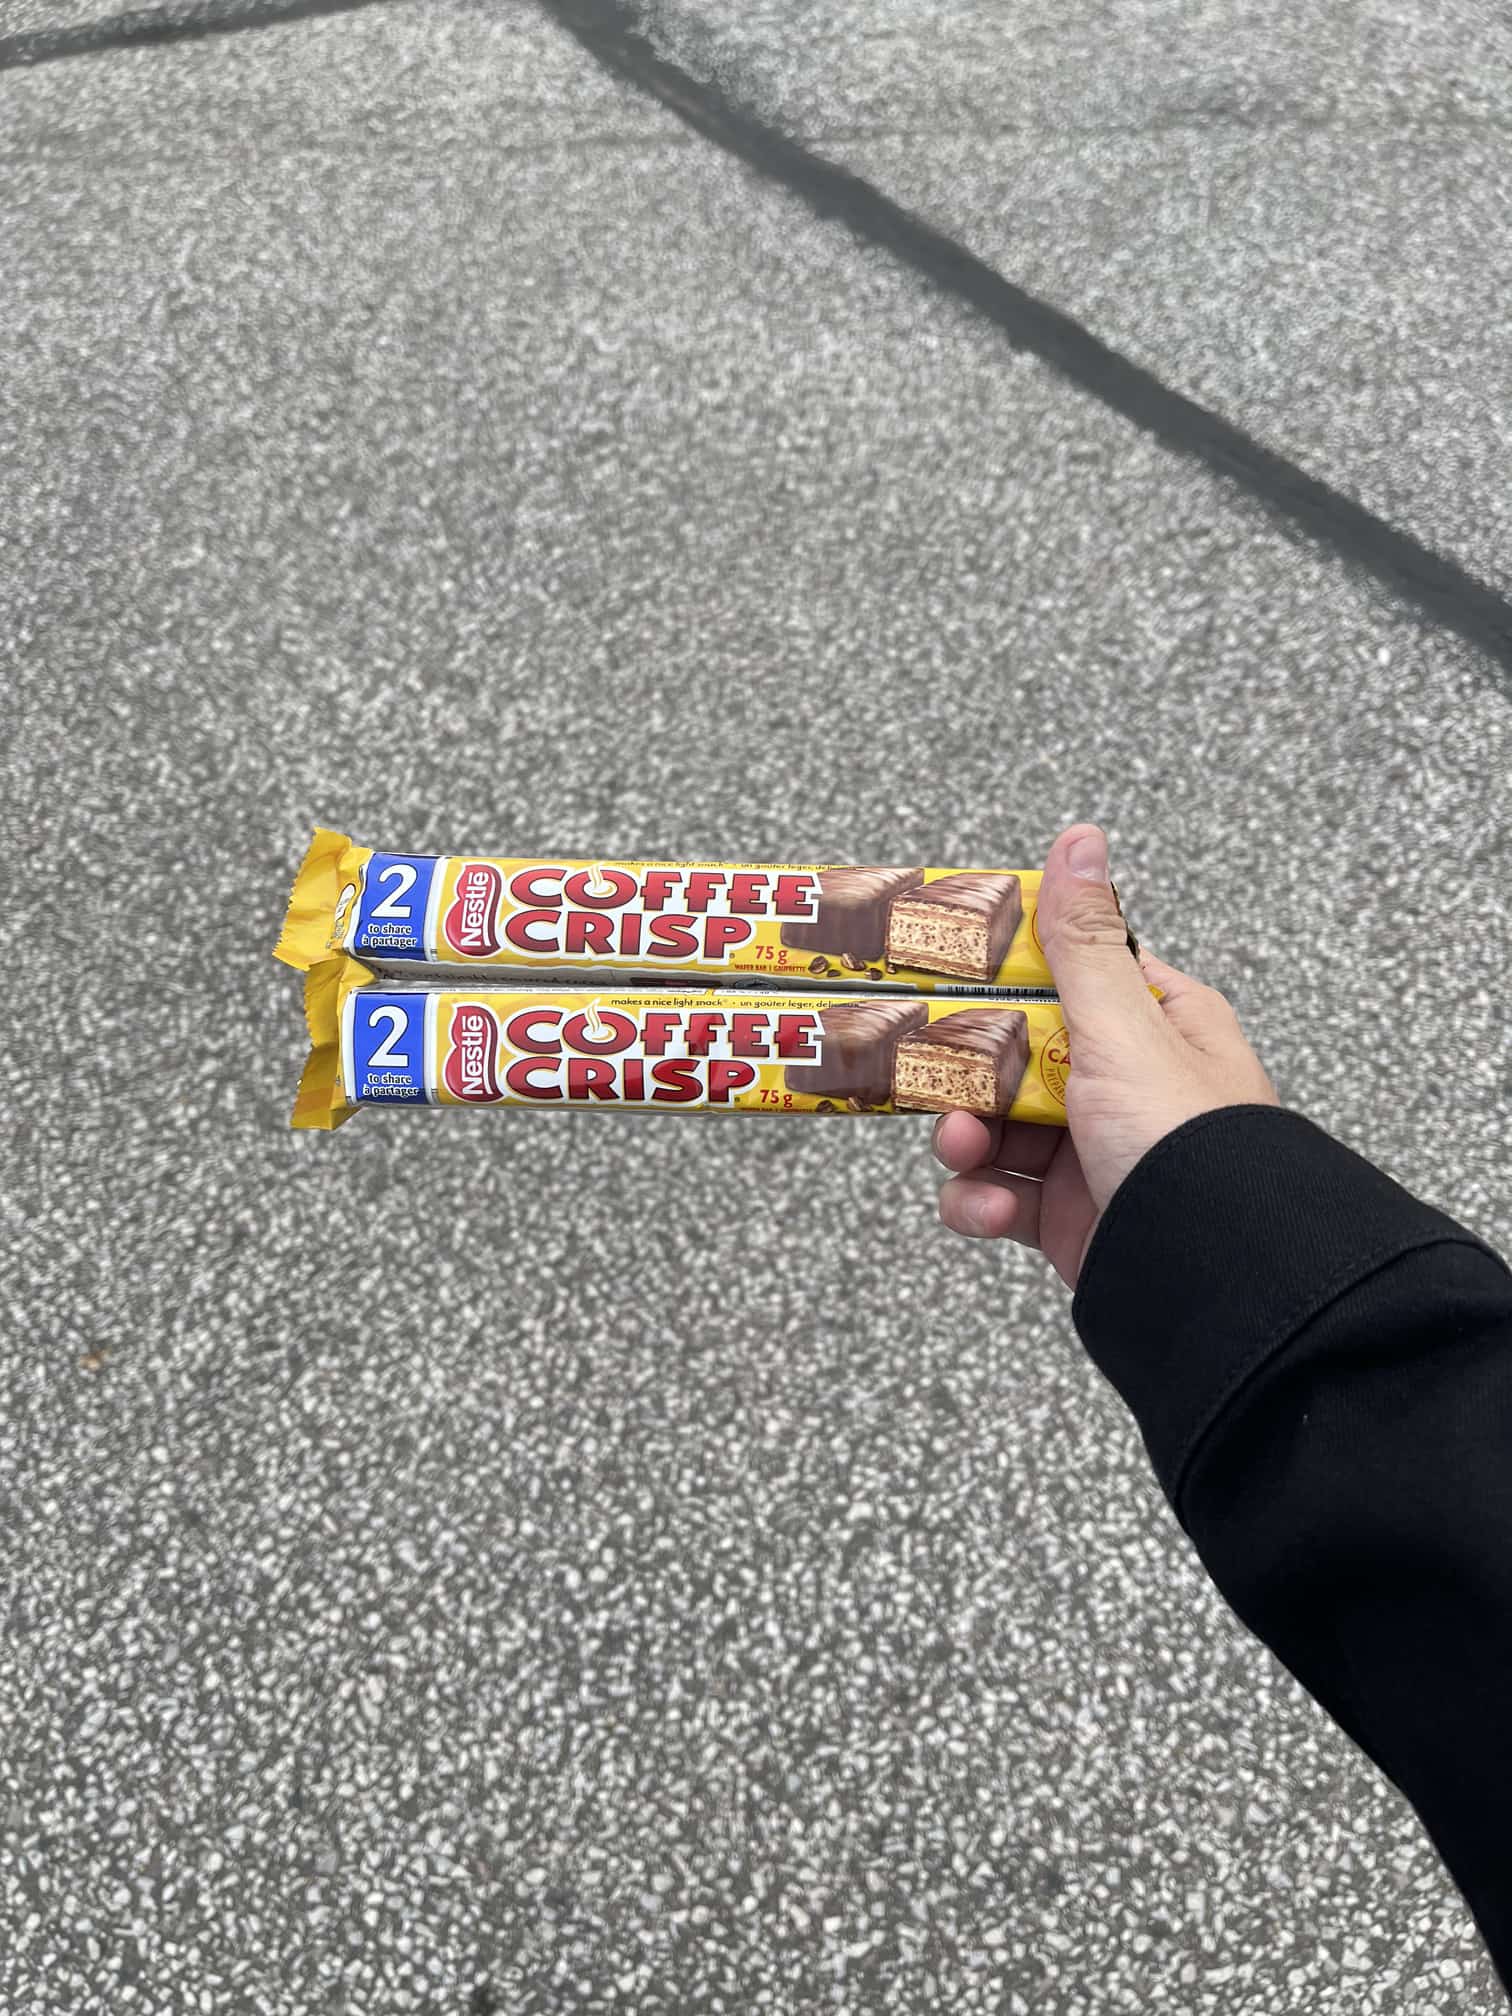 Coffee crisp- the most delicious candy bar in all of canada